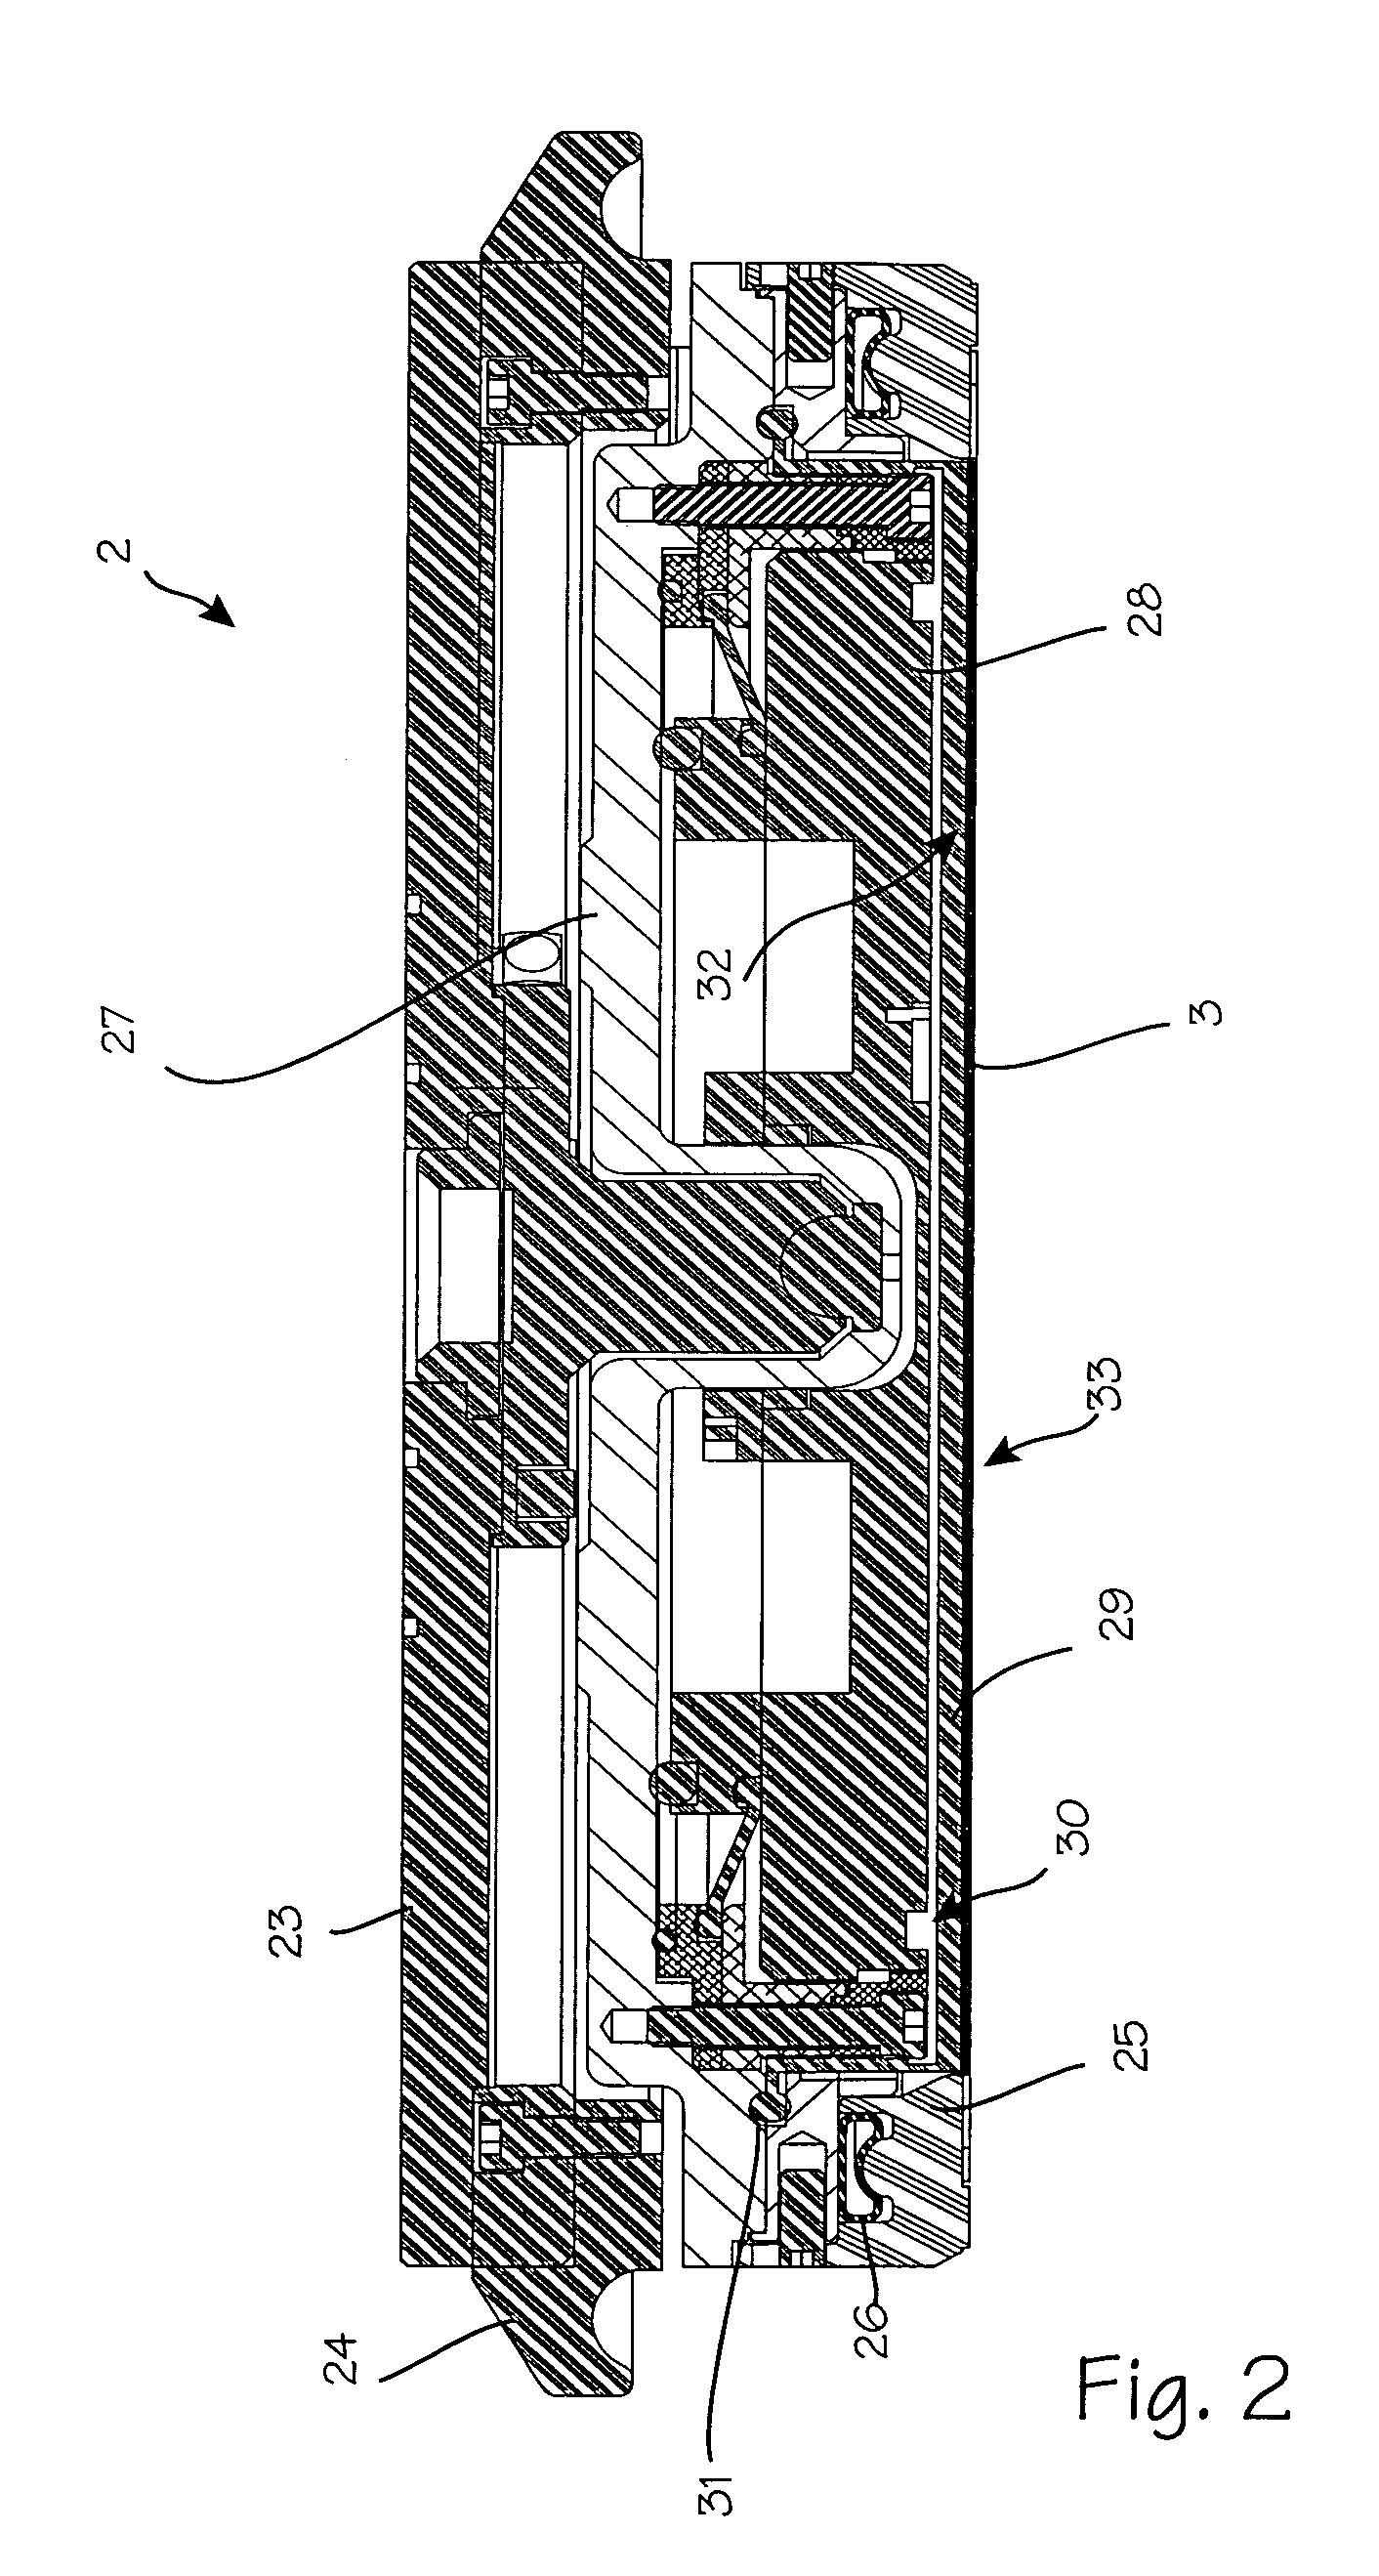 Wafer carrier with pressurized membrane and retaining ring actuator